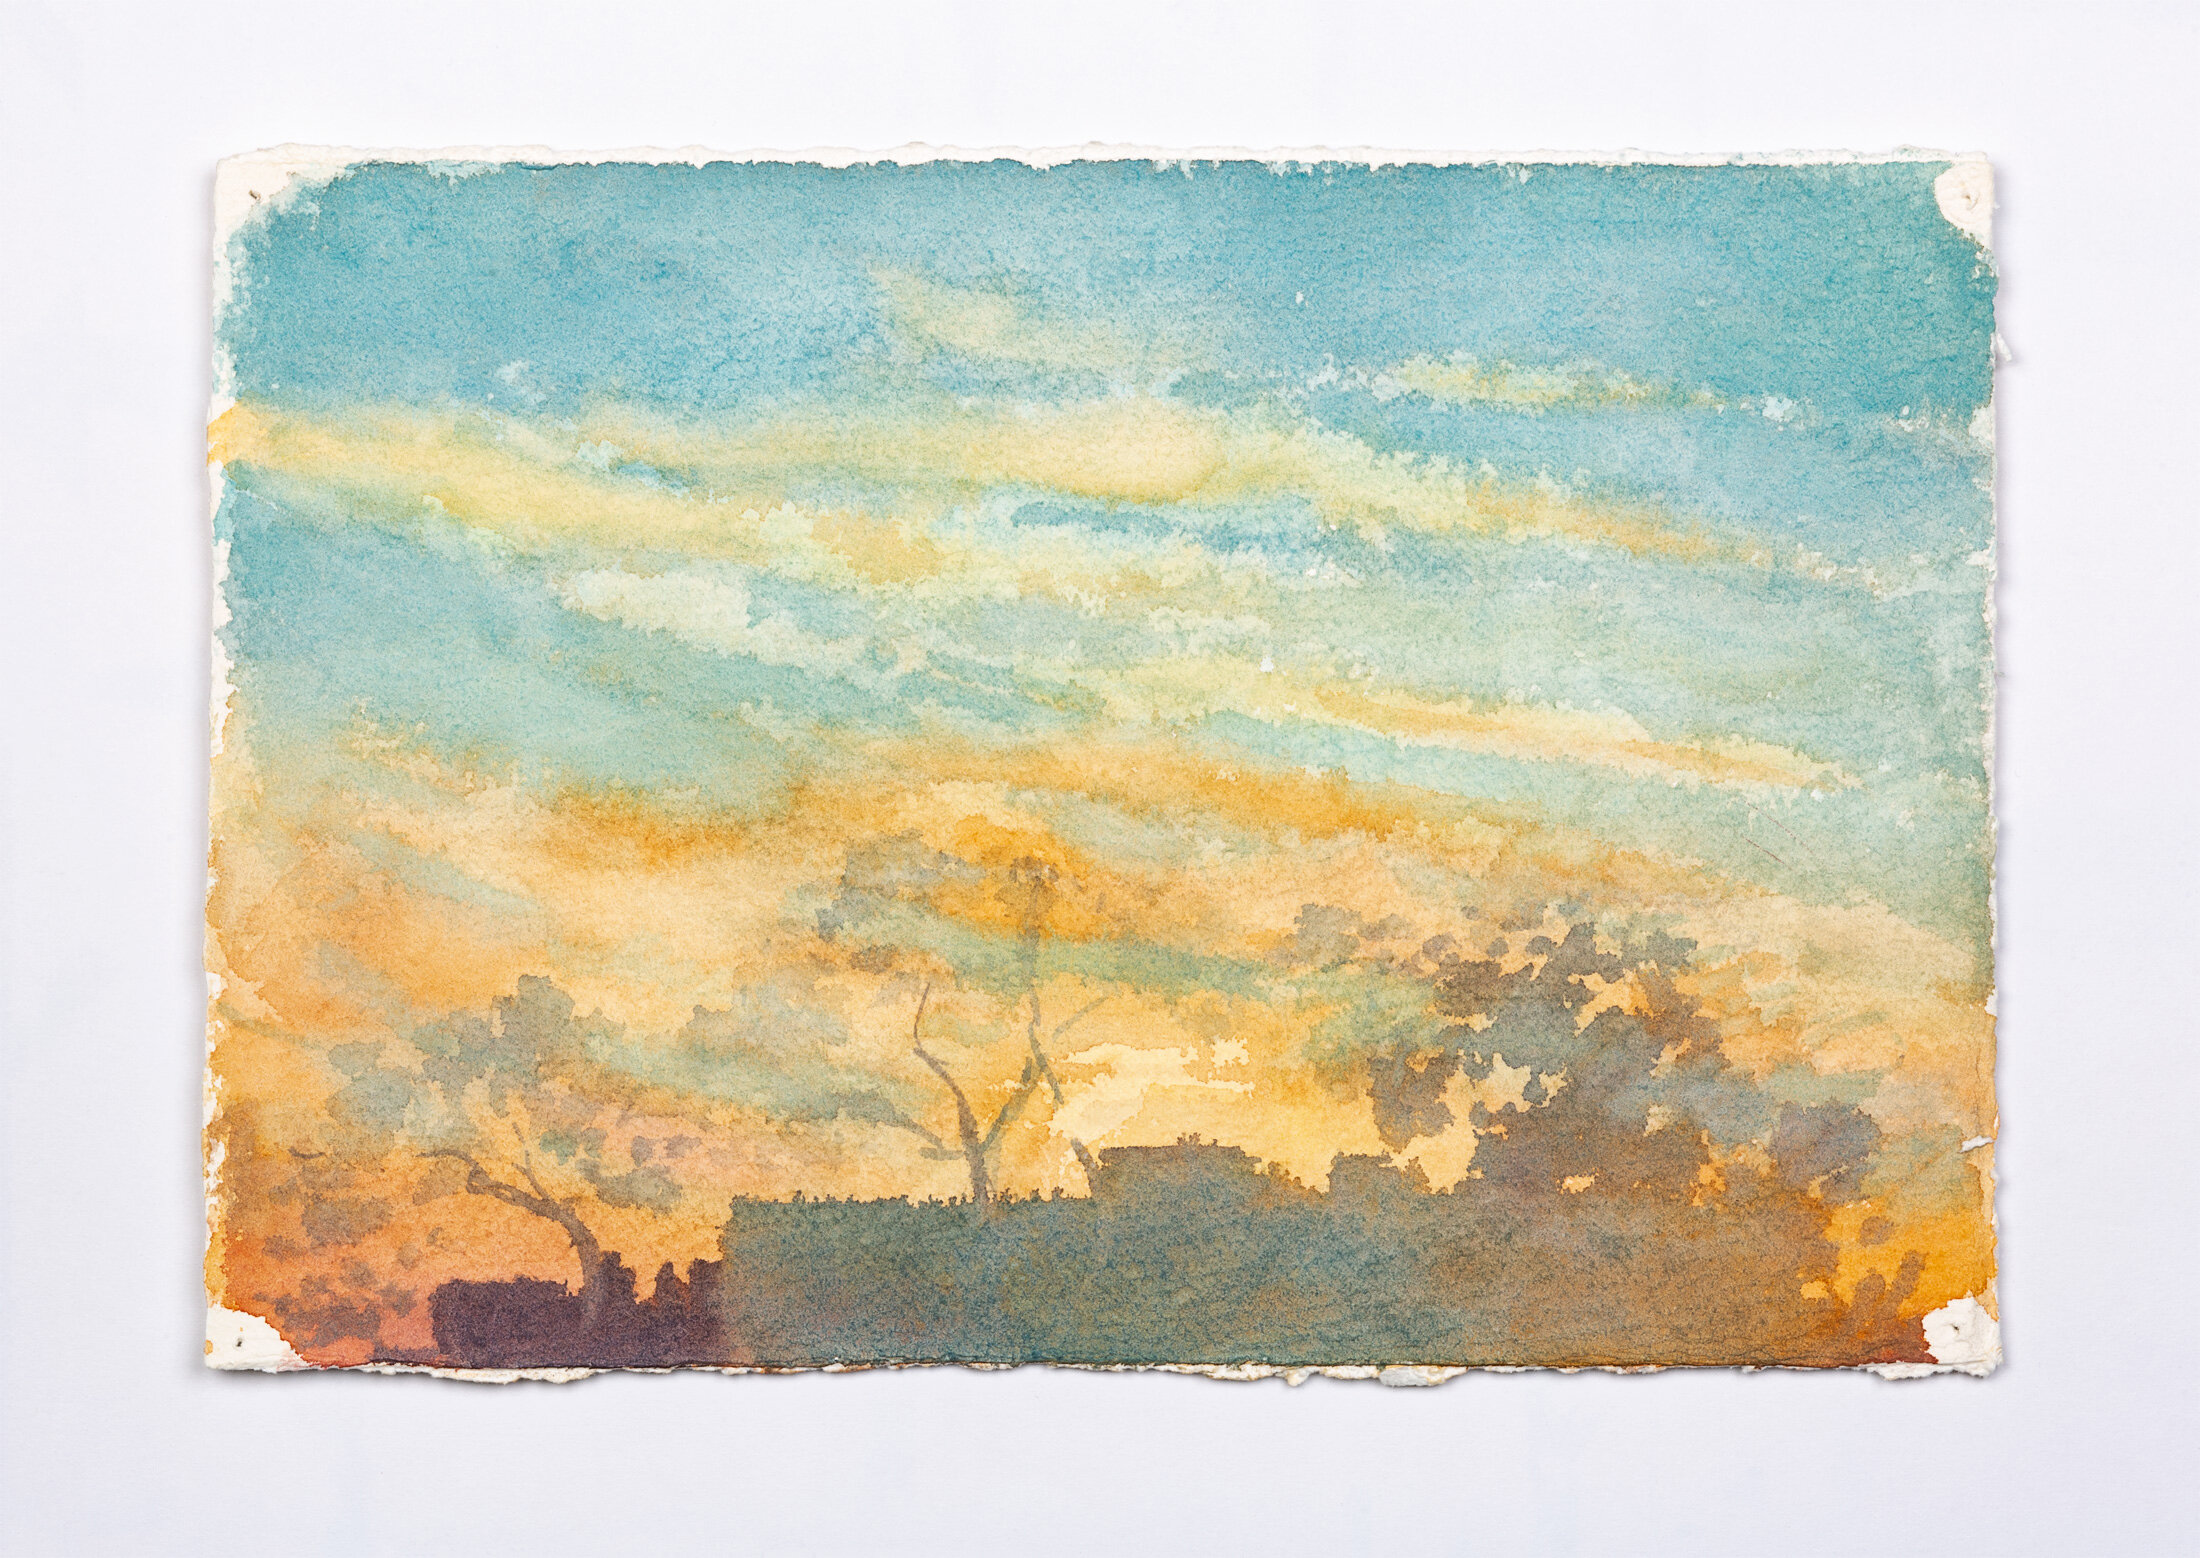 Sunset Clouds. Brooklyn, 2012 - watercolor on paper